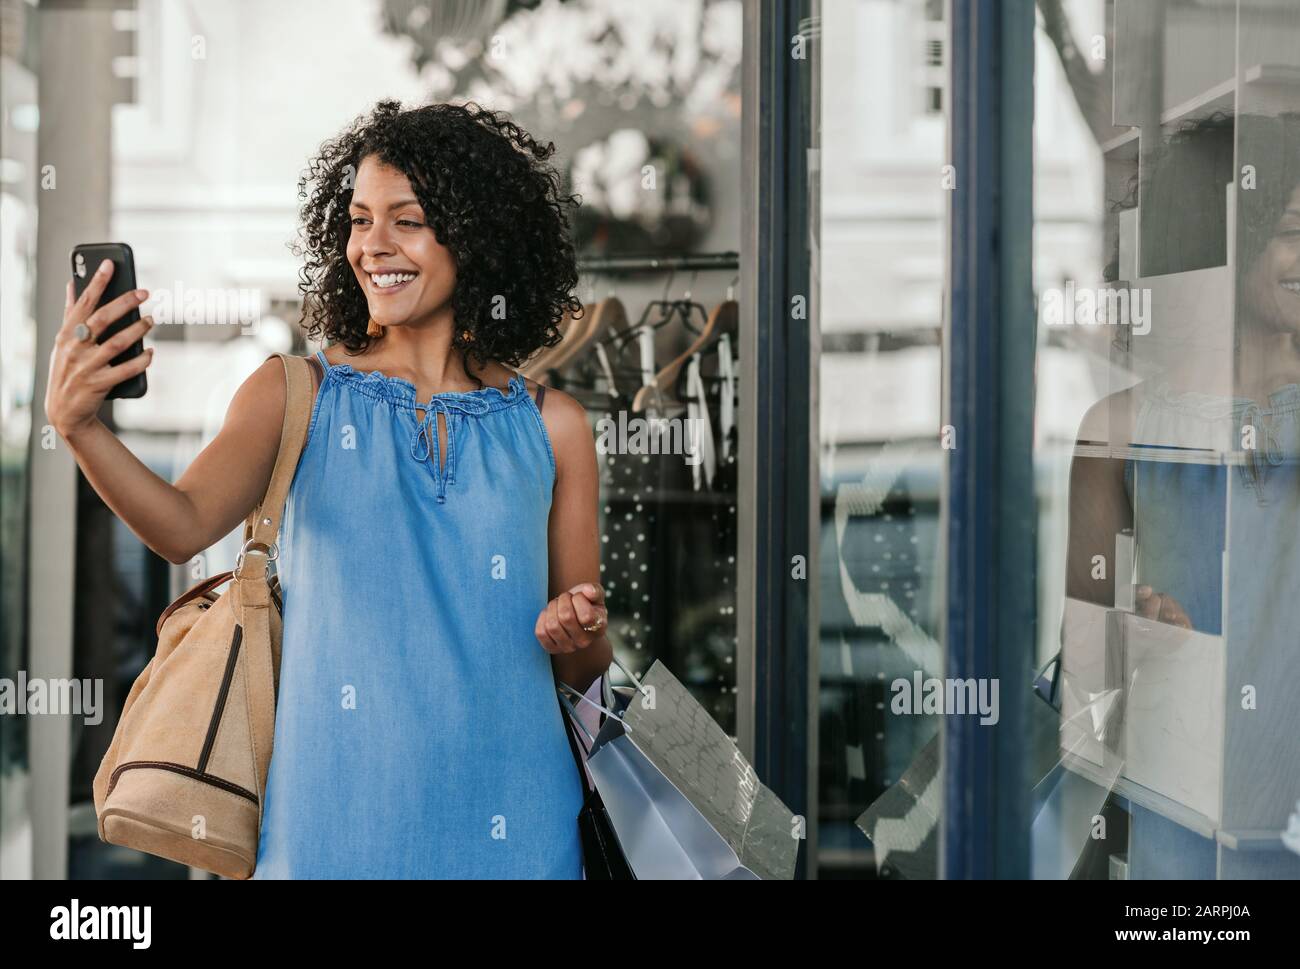 Smiling woman taking selfies while out clothes shopping Stock Photo